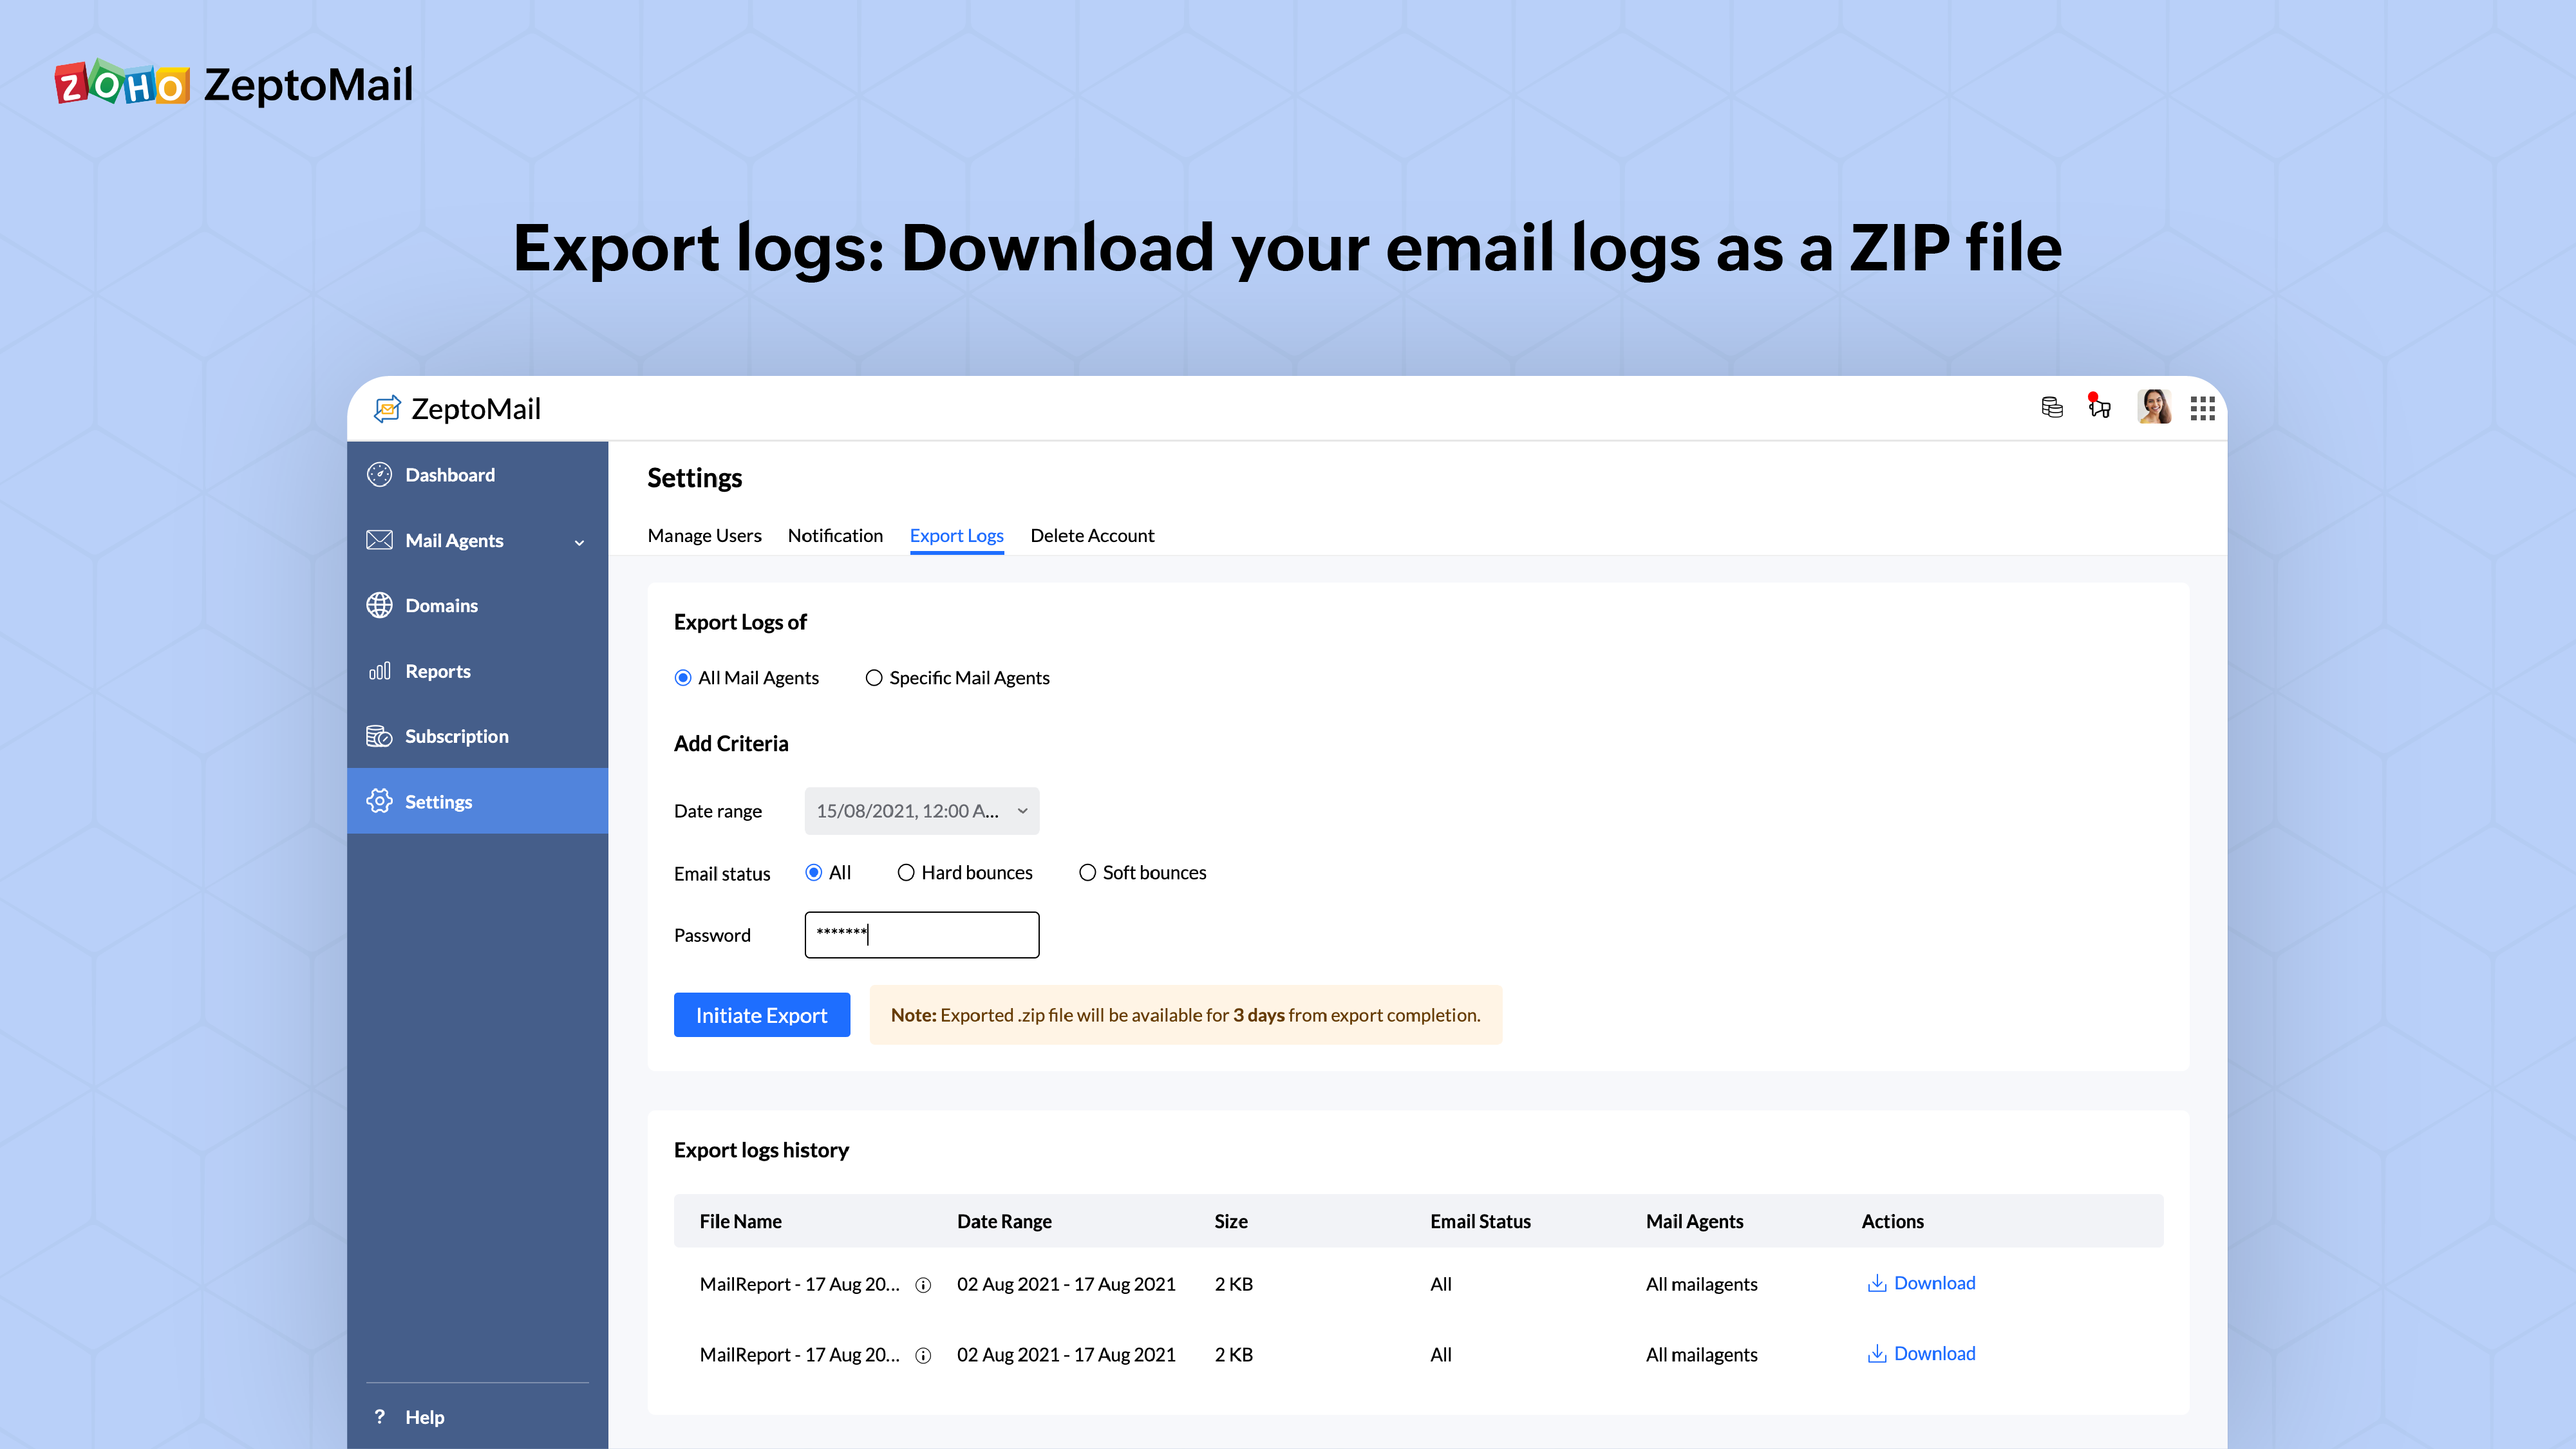 Export logs: Download your email logs as a ZIP file